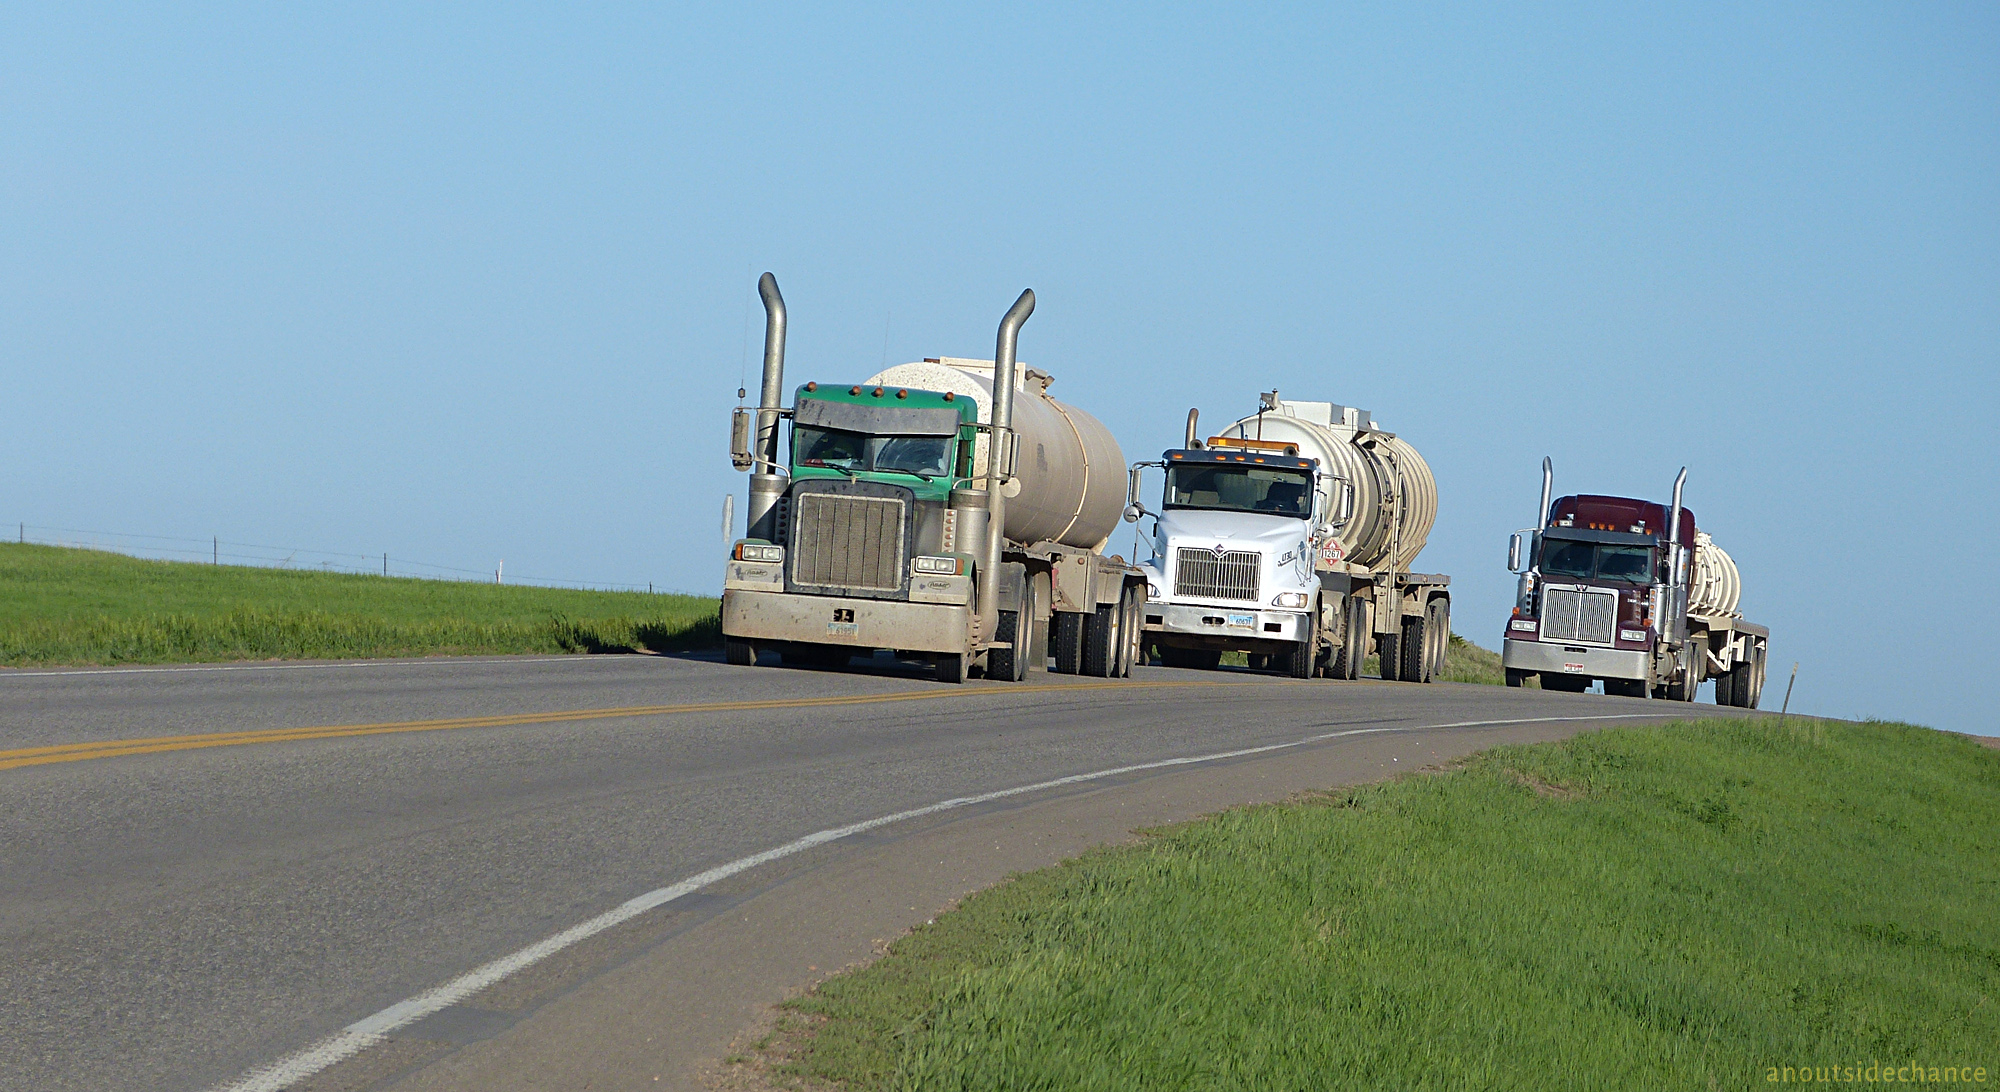 Tractor-trailers hauling oil and water on North Dakota highway.